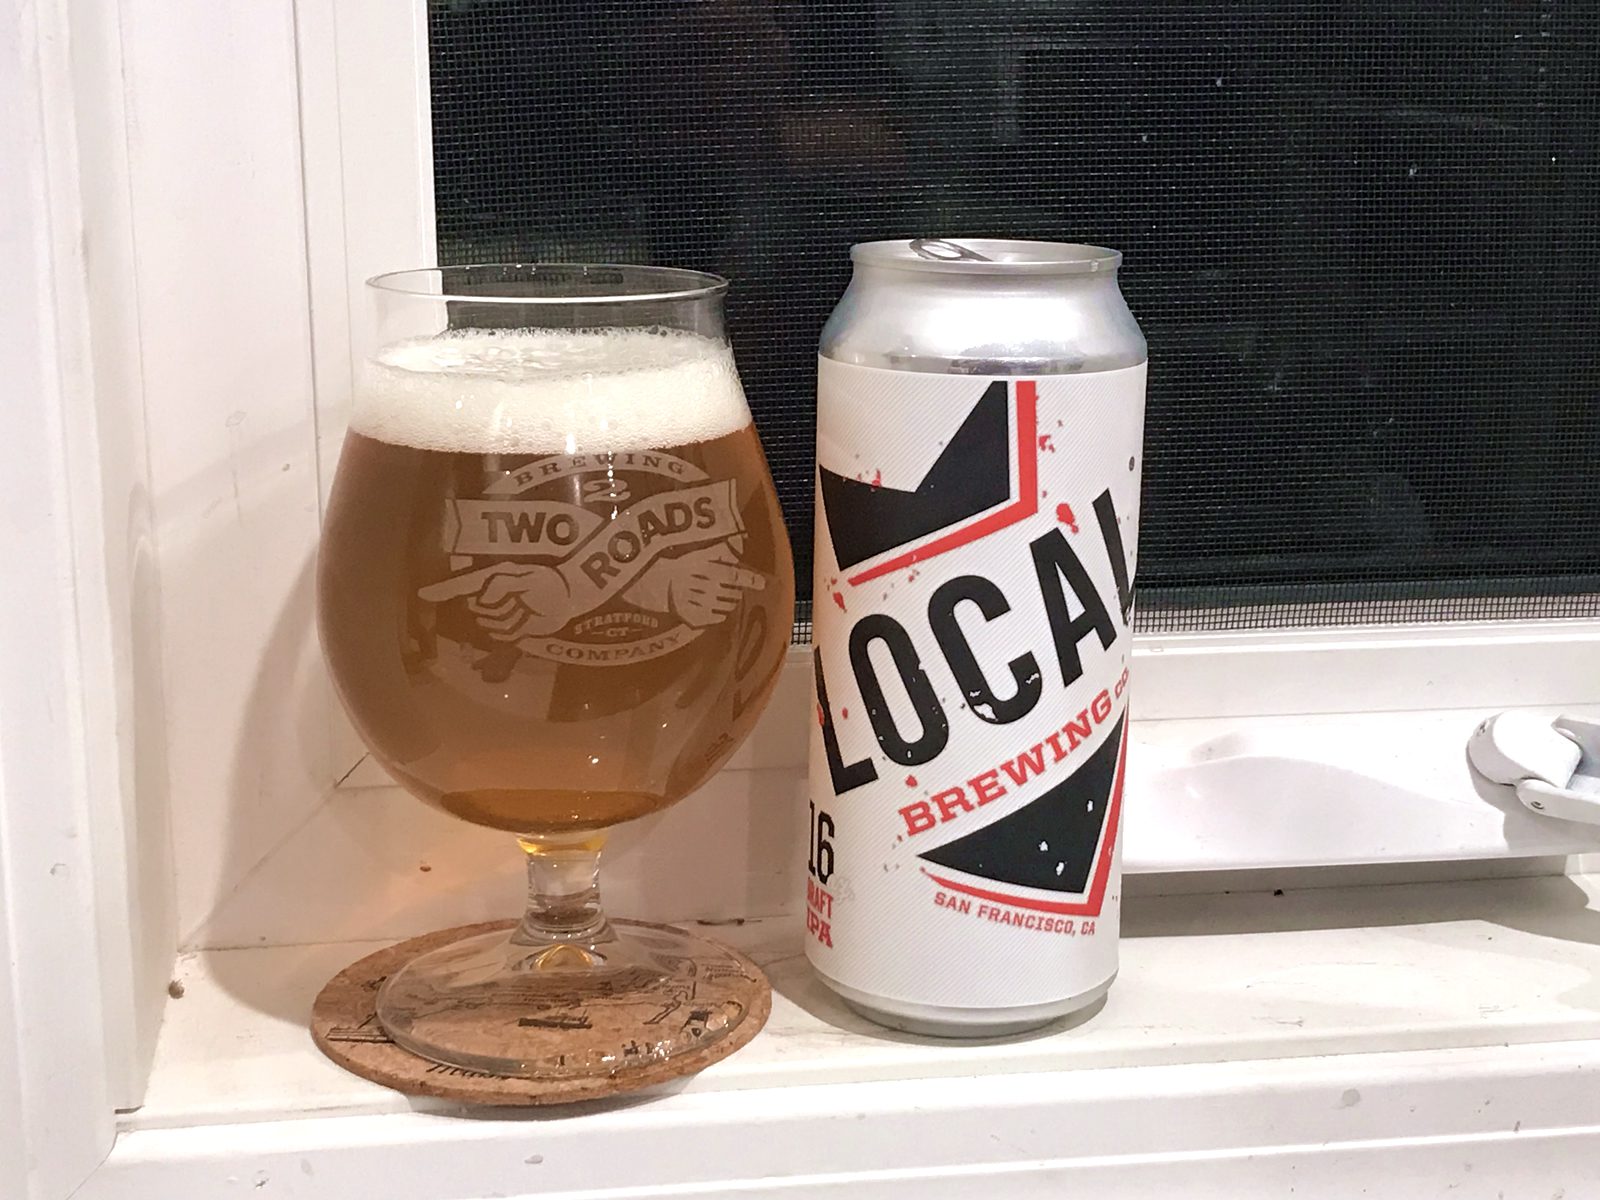 Local Brewing Co.: In the Family